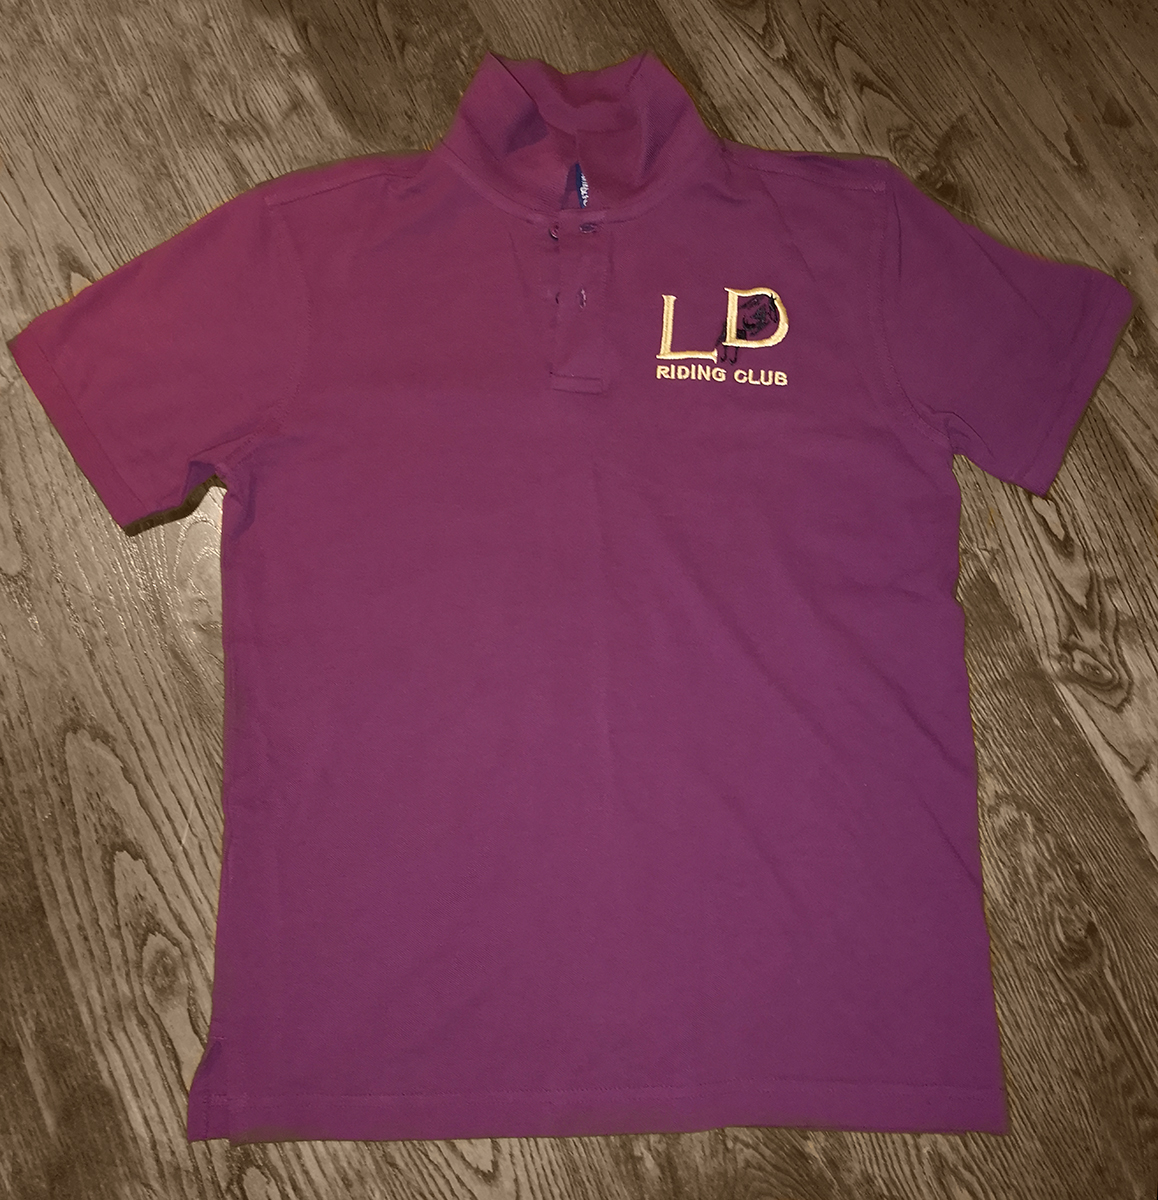 Polo's - £12.50 (front emb only) £16.50 (front and back emb)